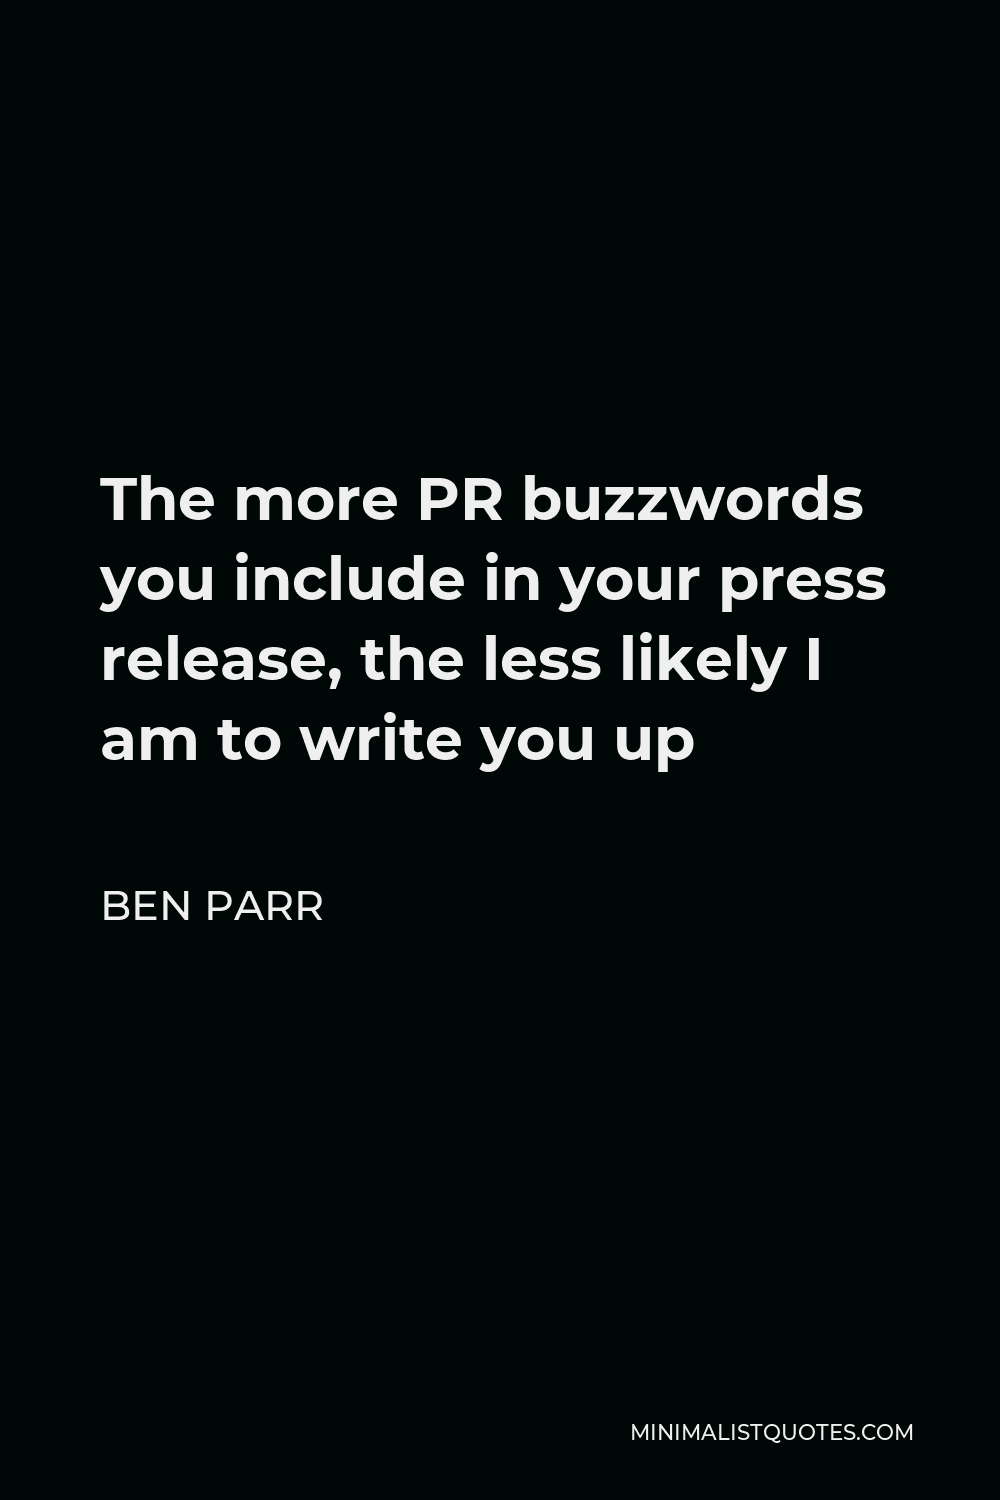 Ben Parr Quote - The more PR buzzwords you include in your press release, the less likely I am to write you up